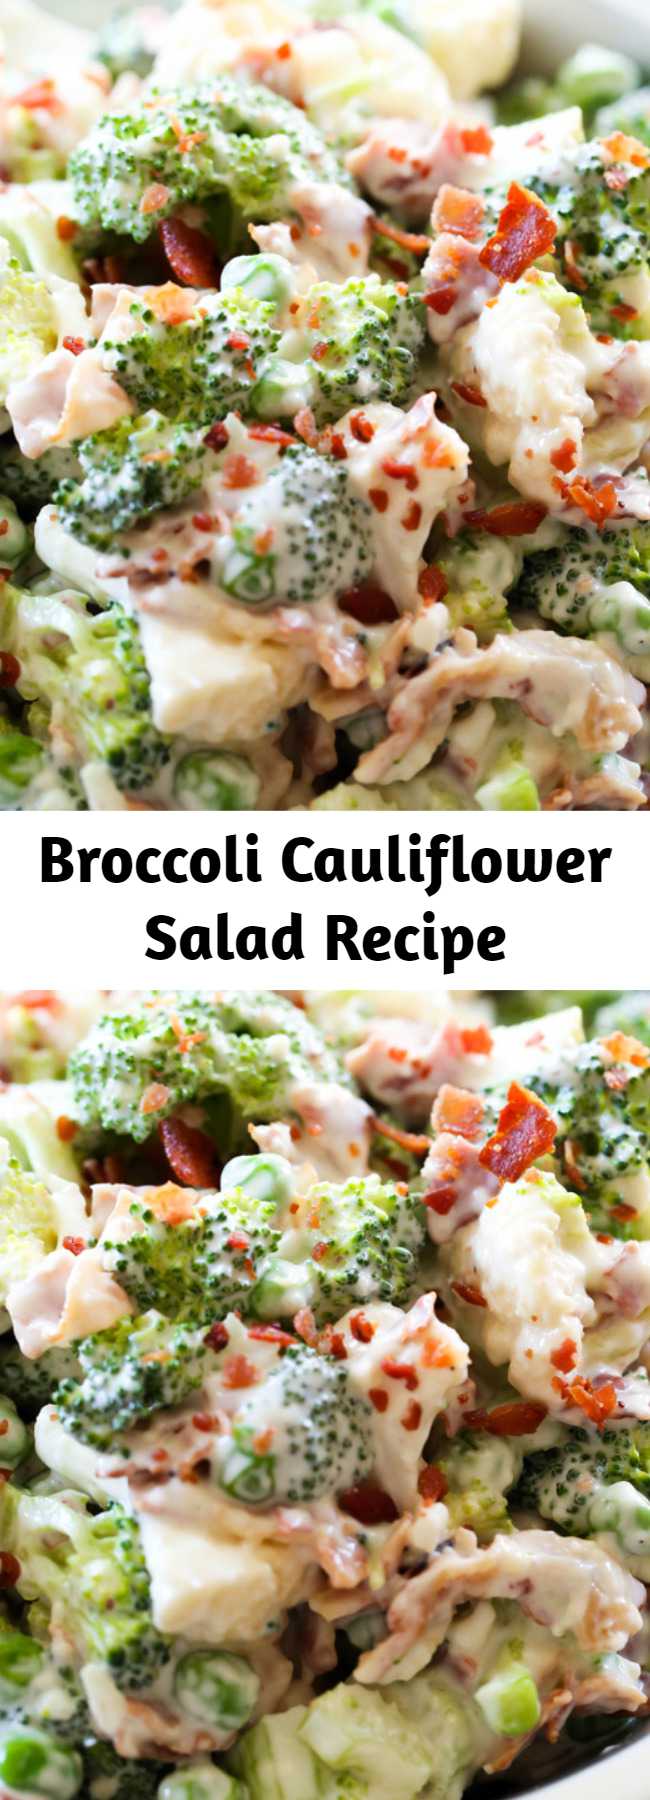 Broccoli Cauliflower Salad Recipe - This salad is AMAZING! The creamy dressing is beyond delicious and go perfectly with the crisp broccoli and cauliflower! This is one recipe you are going to want to try out!